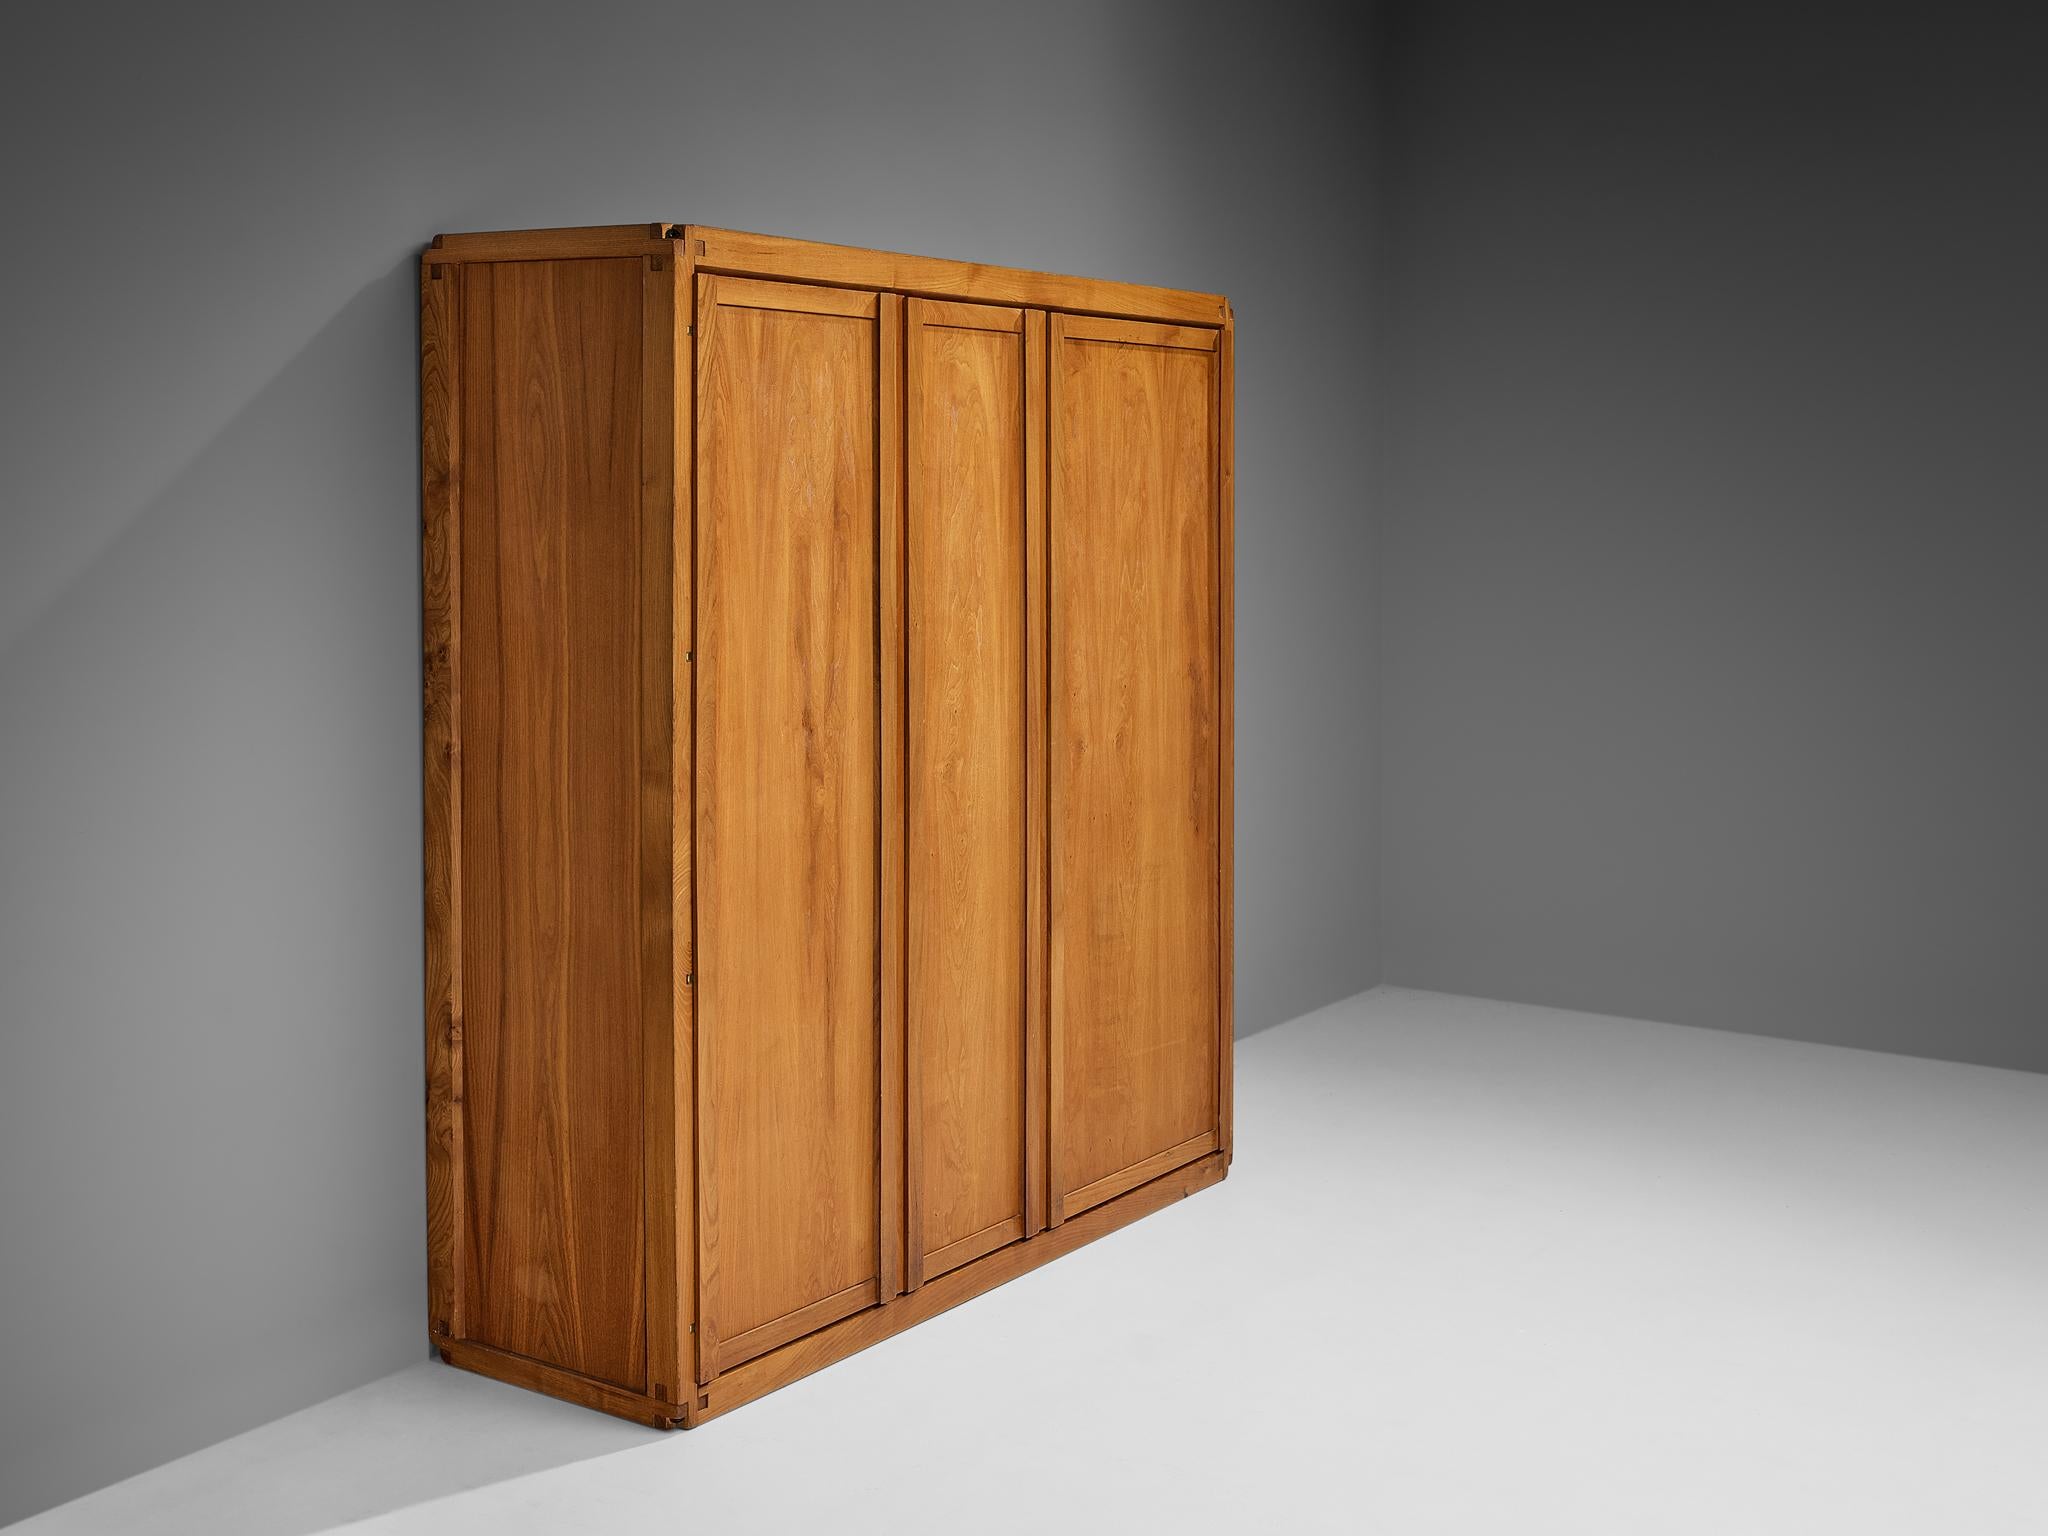 Pierre Chapo, wardrobe, model 'B10', elm, brass, France, 1960s

This armoire by Pierre Chapo has a splendid construction that epitomizes a simplistic, natural and timeless aesthetic. The front convinces with its clear and sheer appearance with